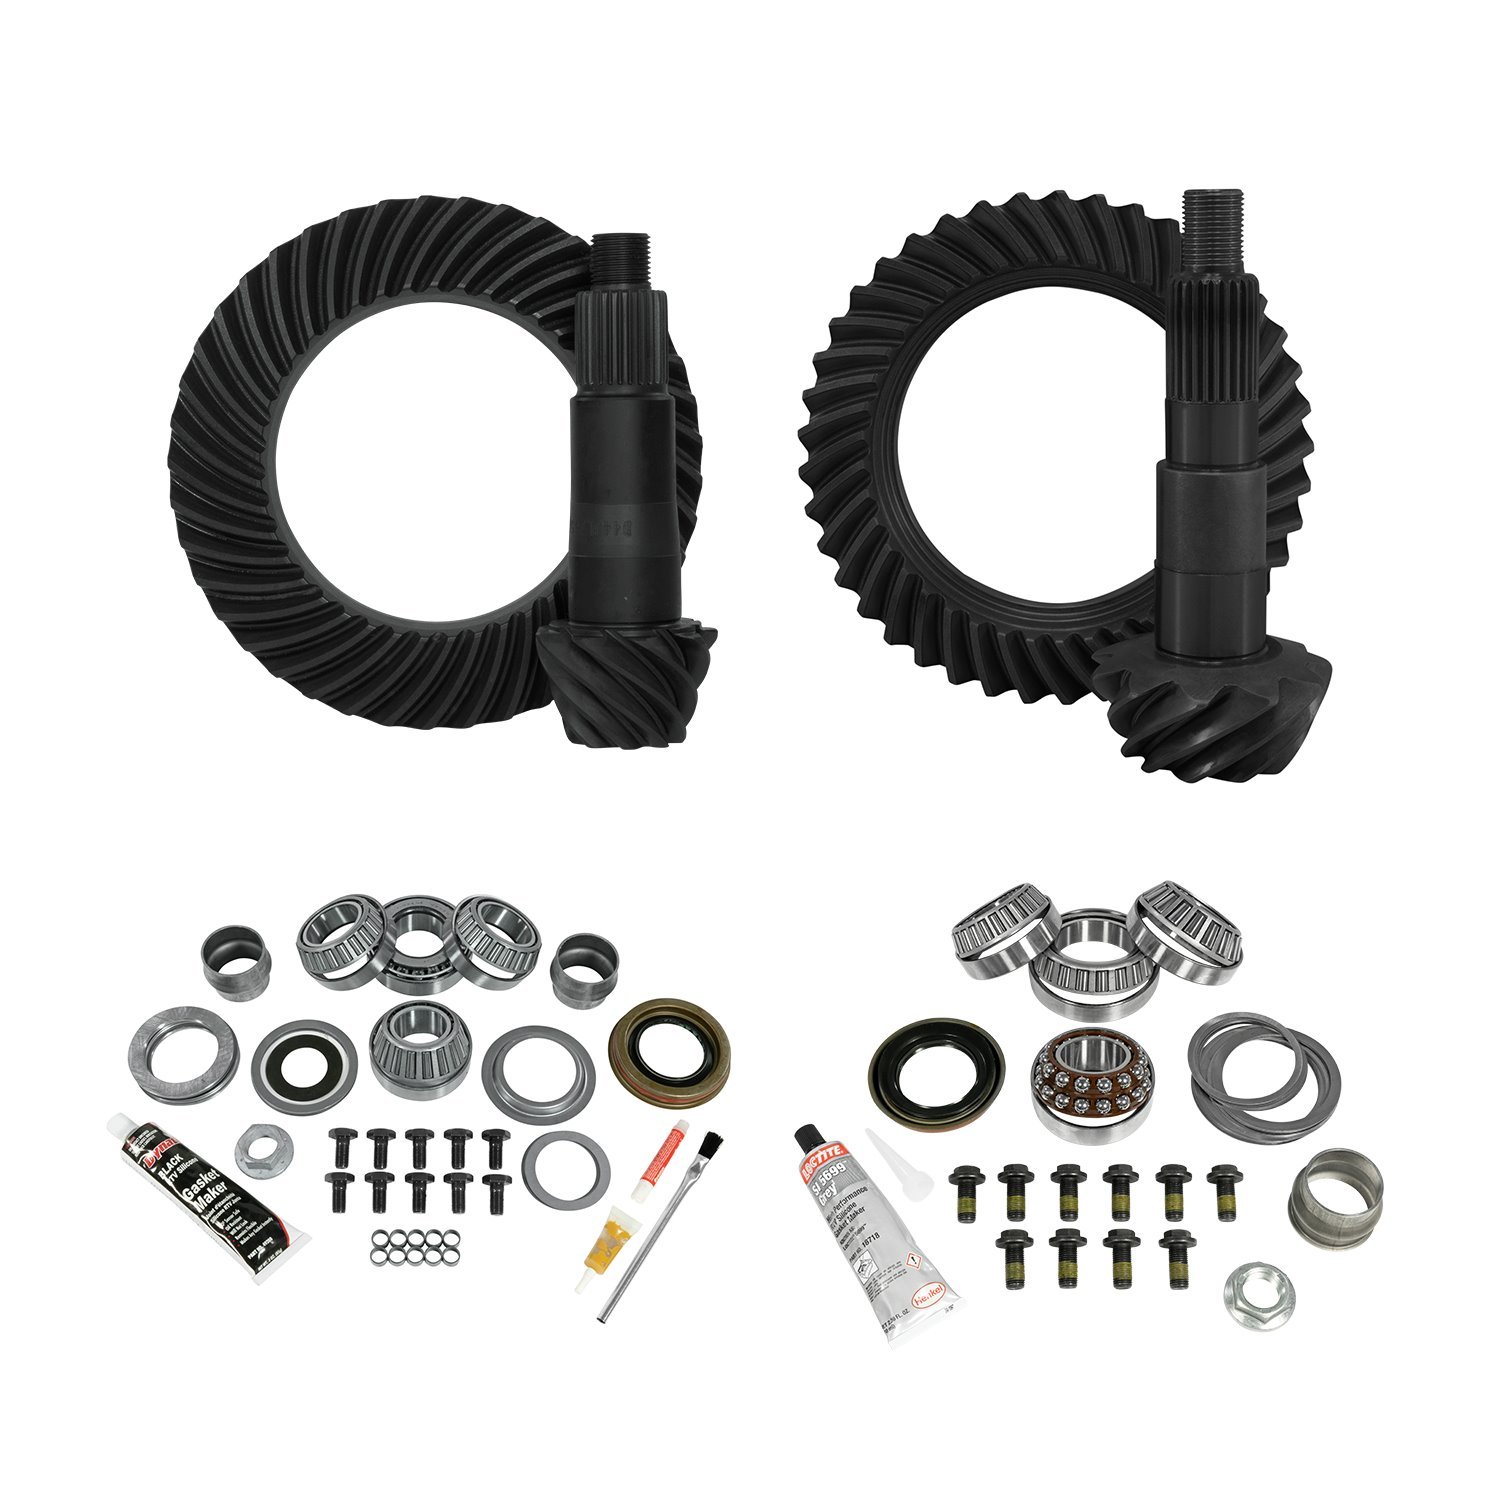 Re-Gear And Install Kit, D30 Front/D44 Rear, Jeep Jl Non-Rubicon, 4.88